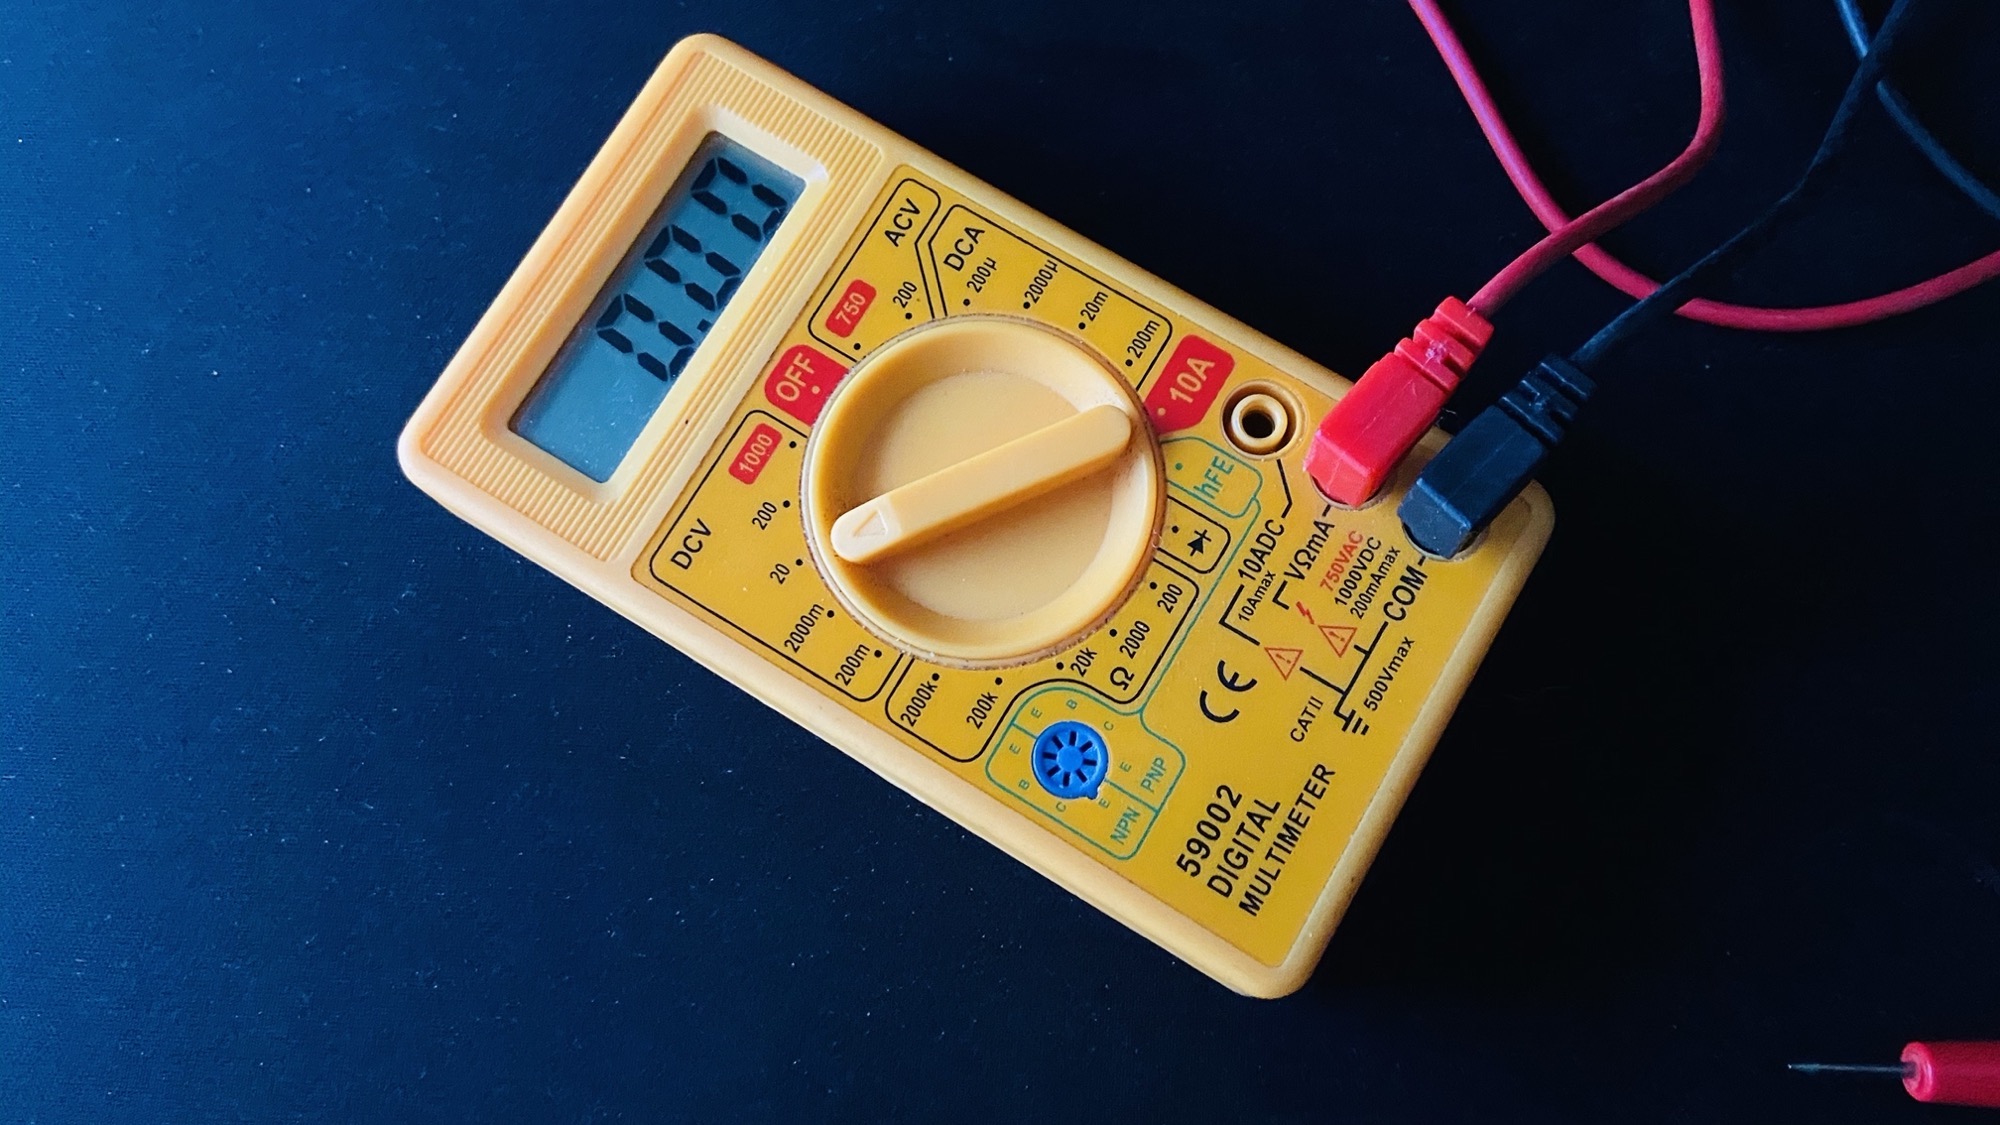 How to test some basic electronic components with a Multimeter